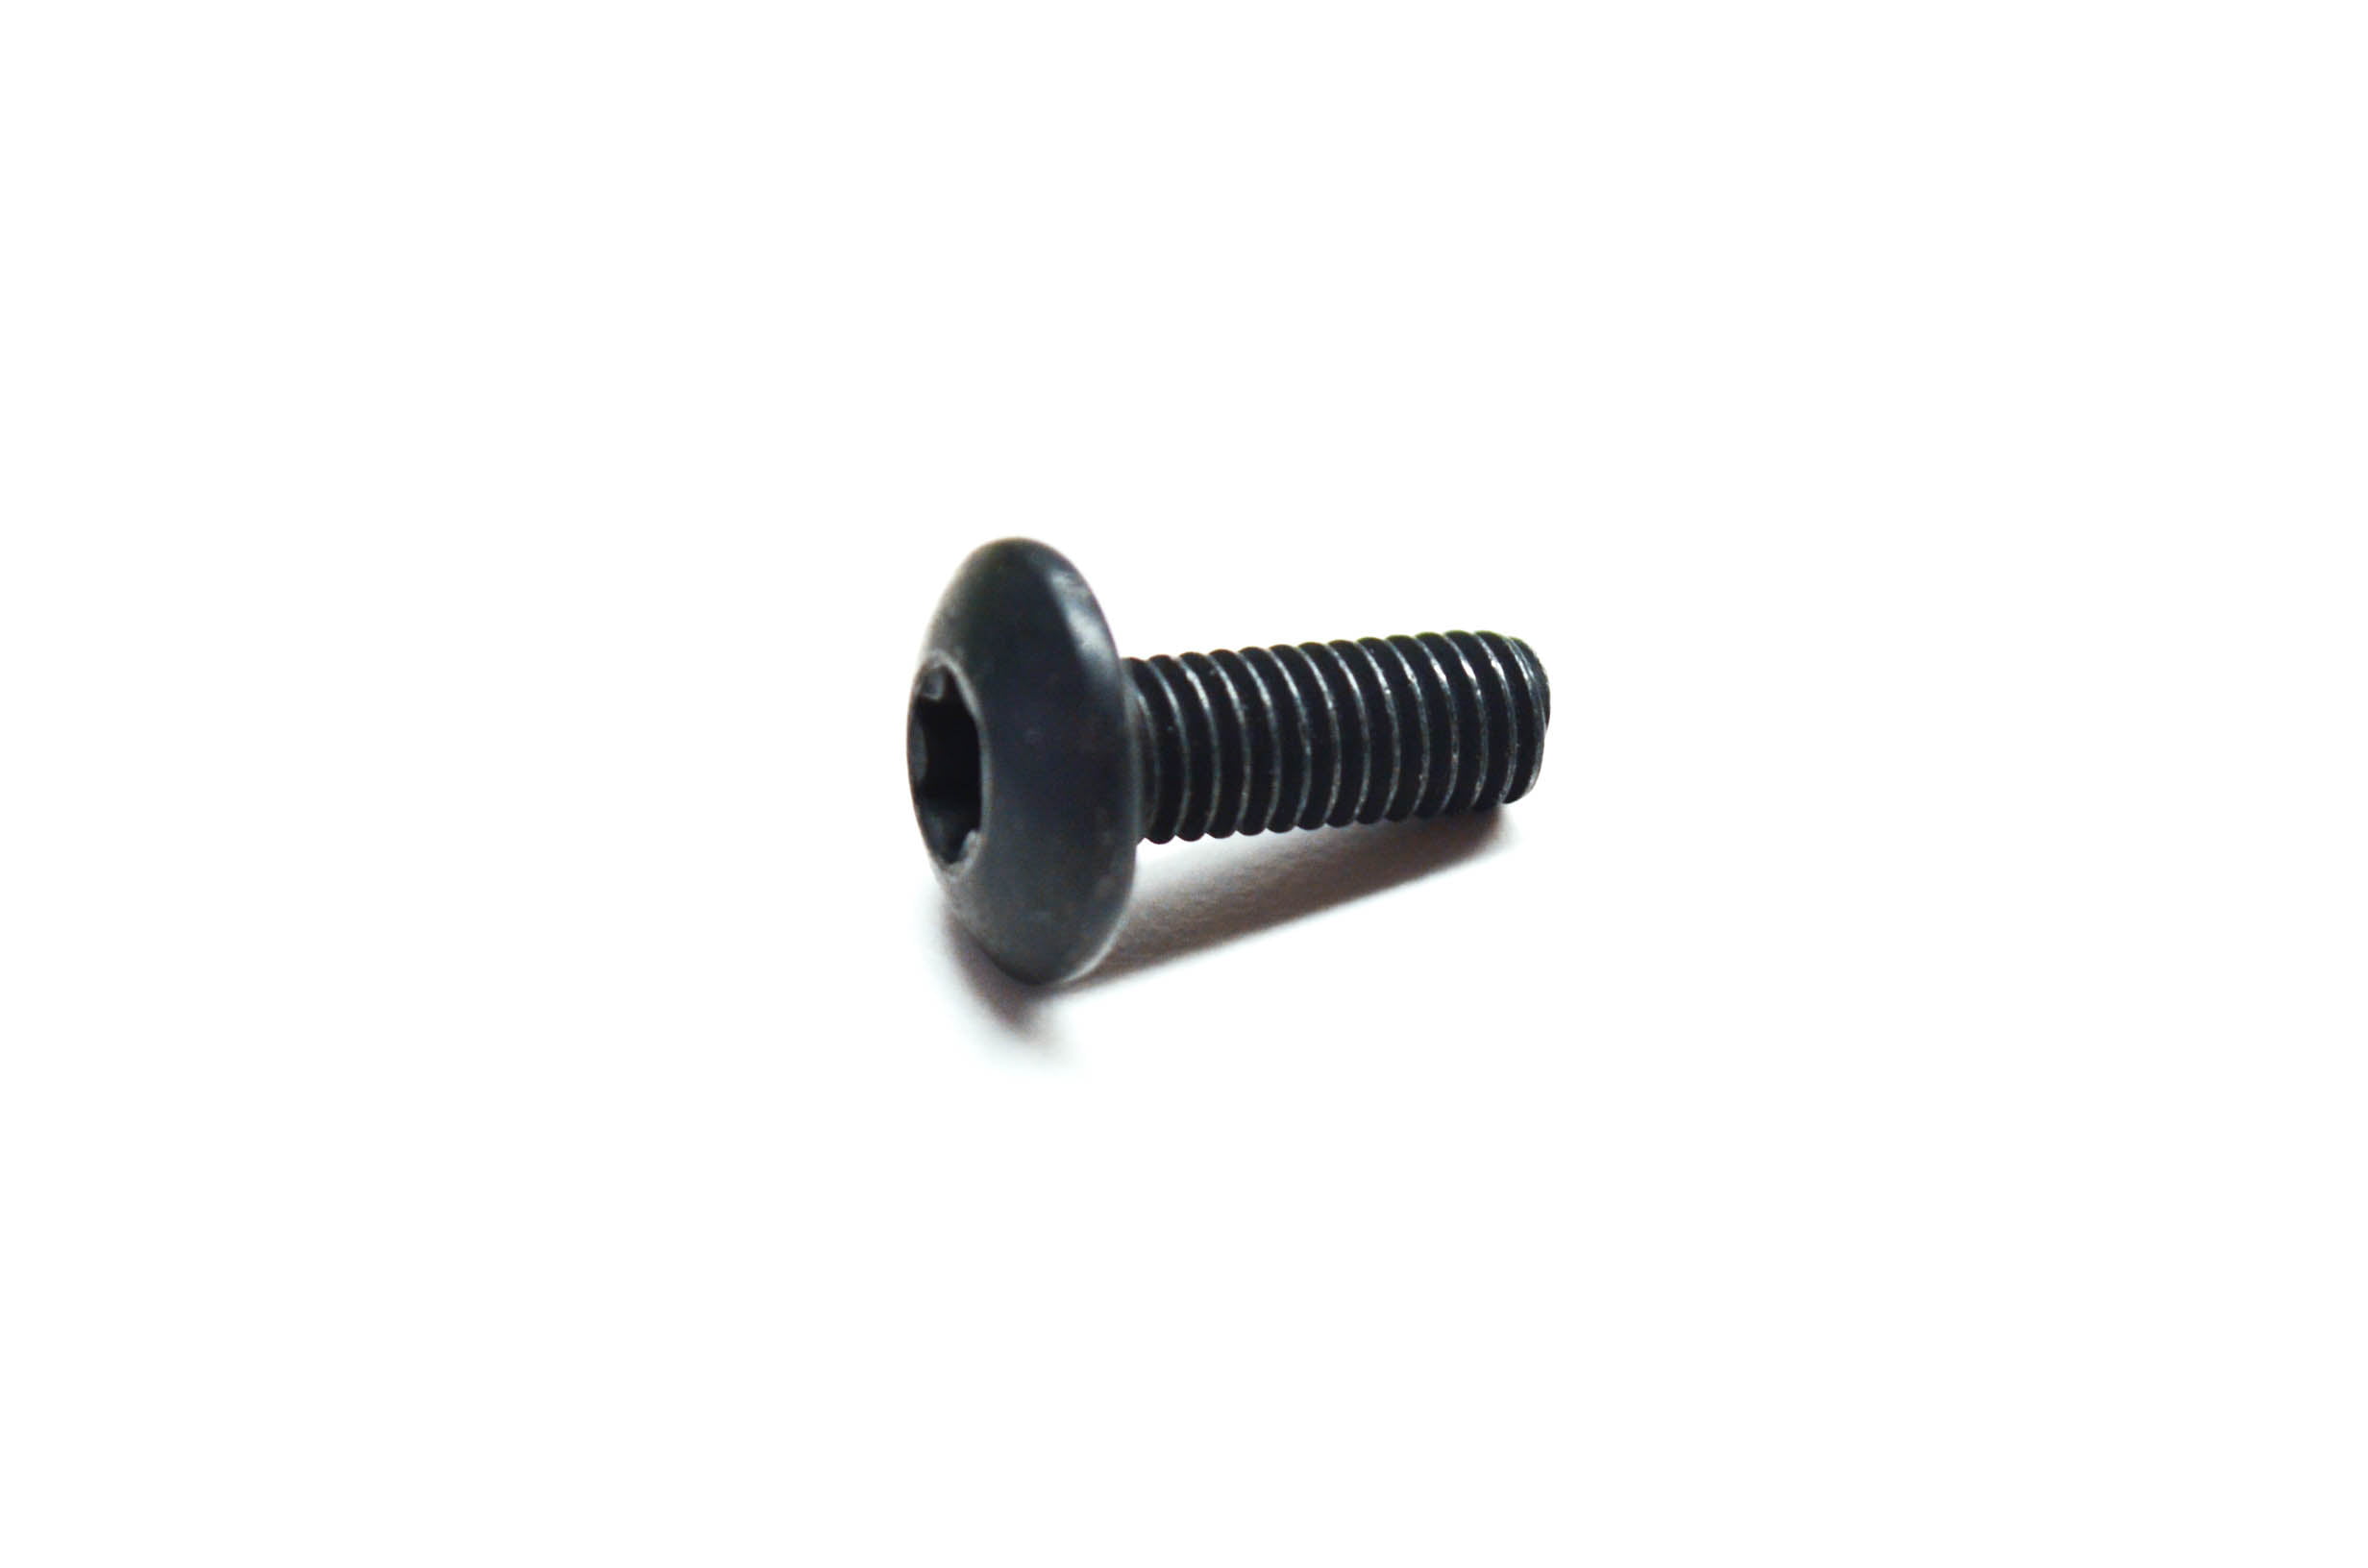 Seadoo Special Hex with Washer Head Screw Part Nubmer 211000073 